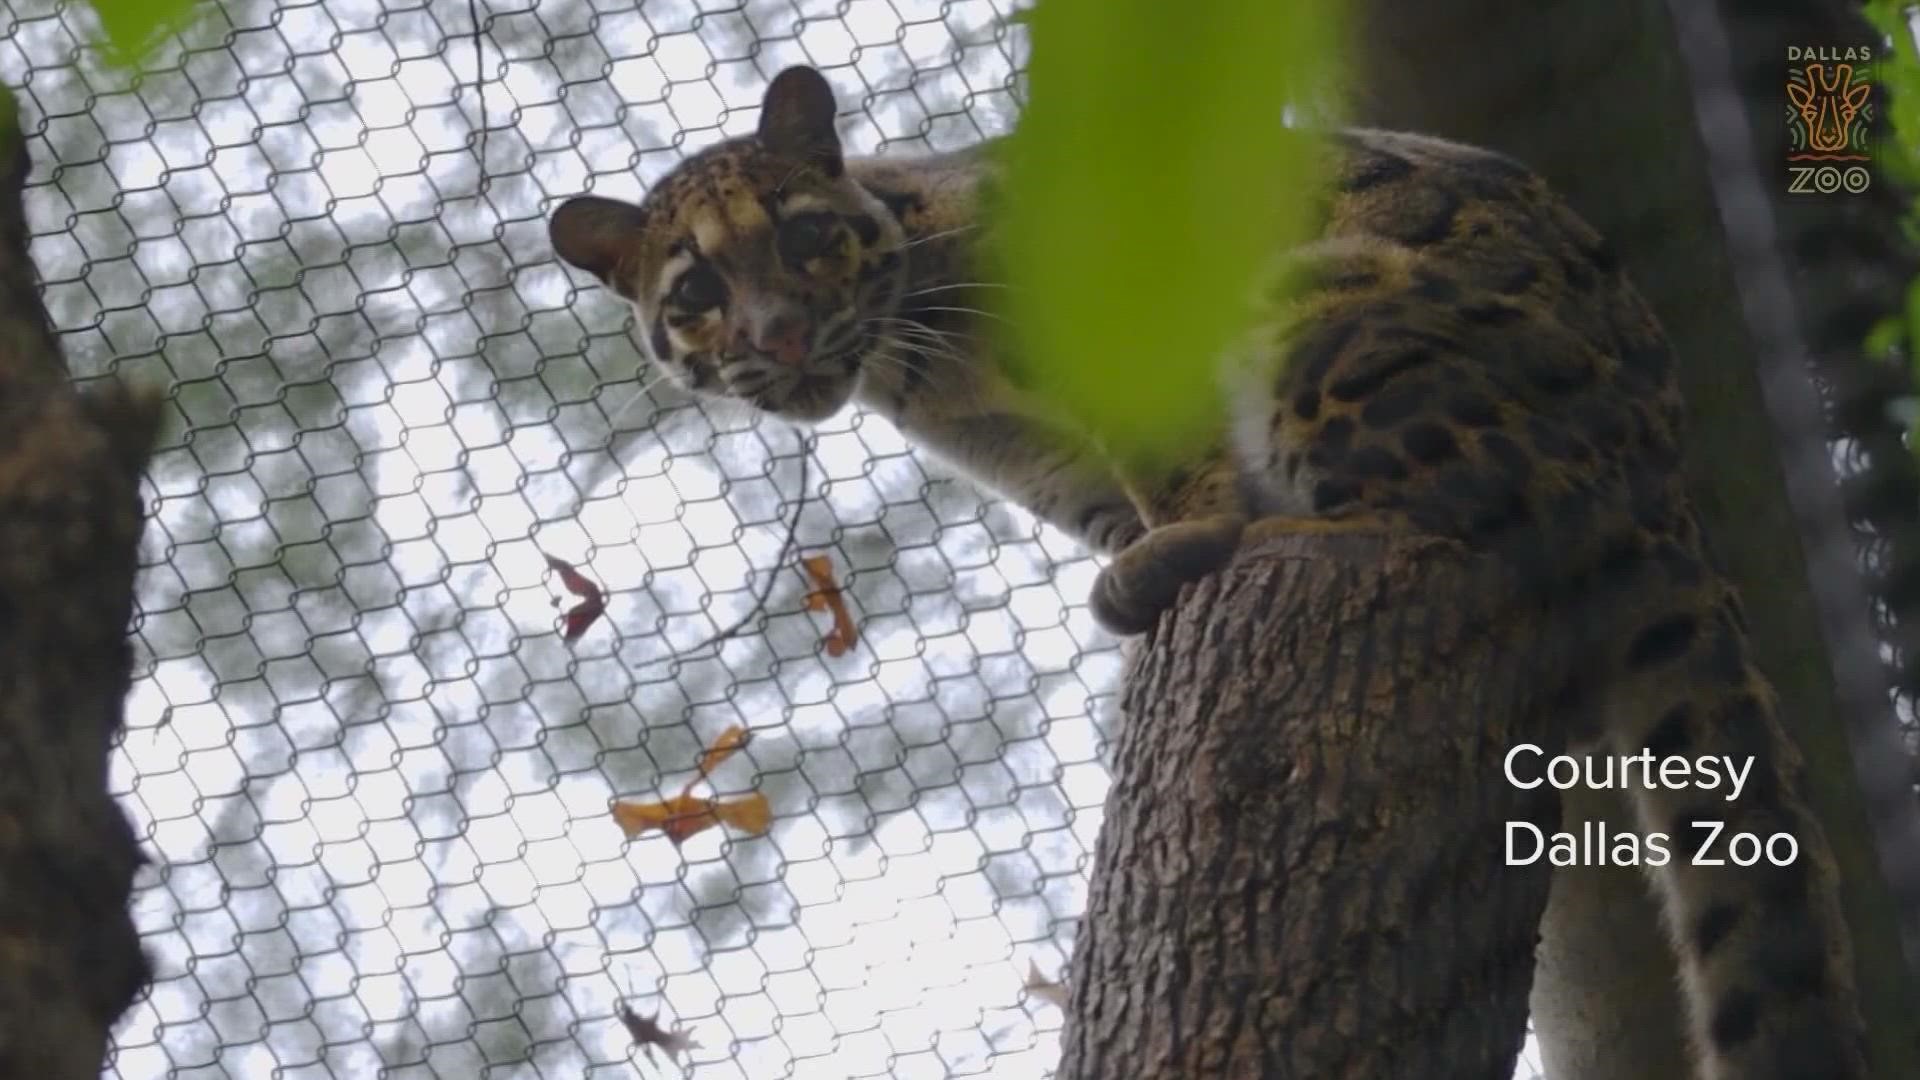 Police believe the clouded leopard's mesh fencing around her habitat was intentionally cut.